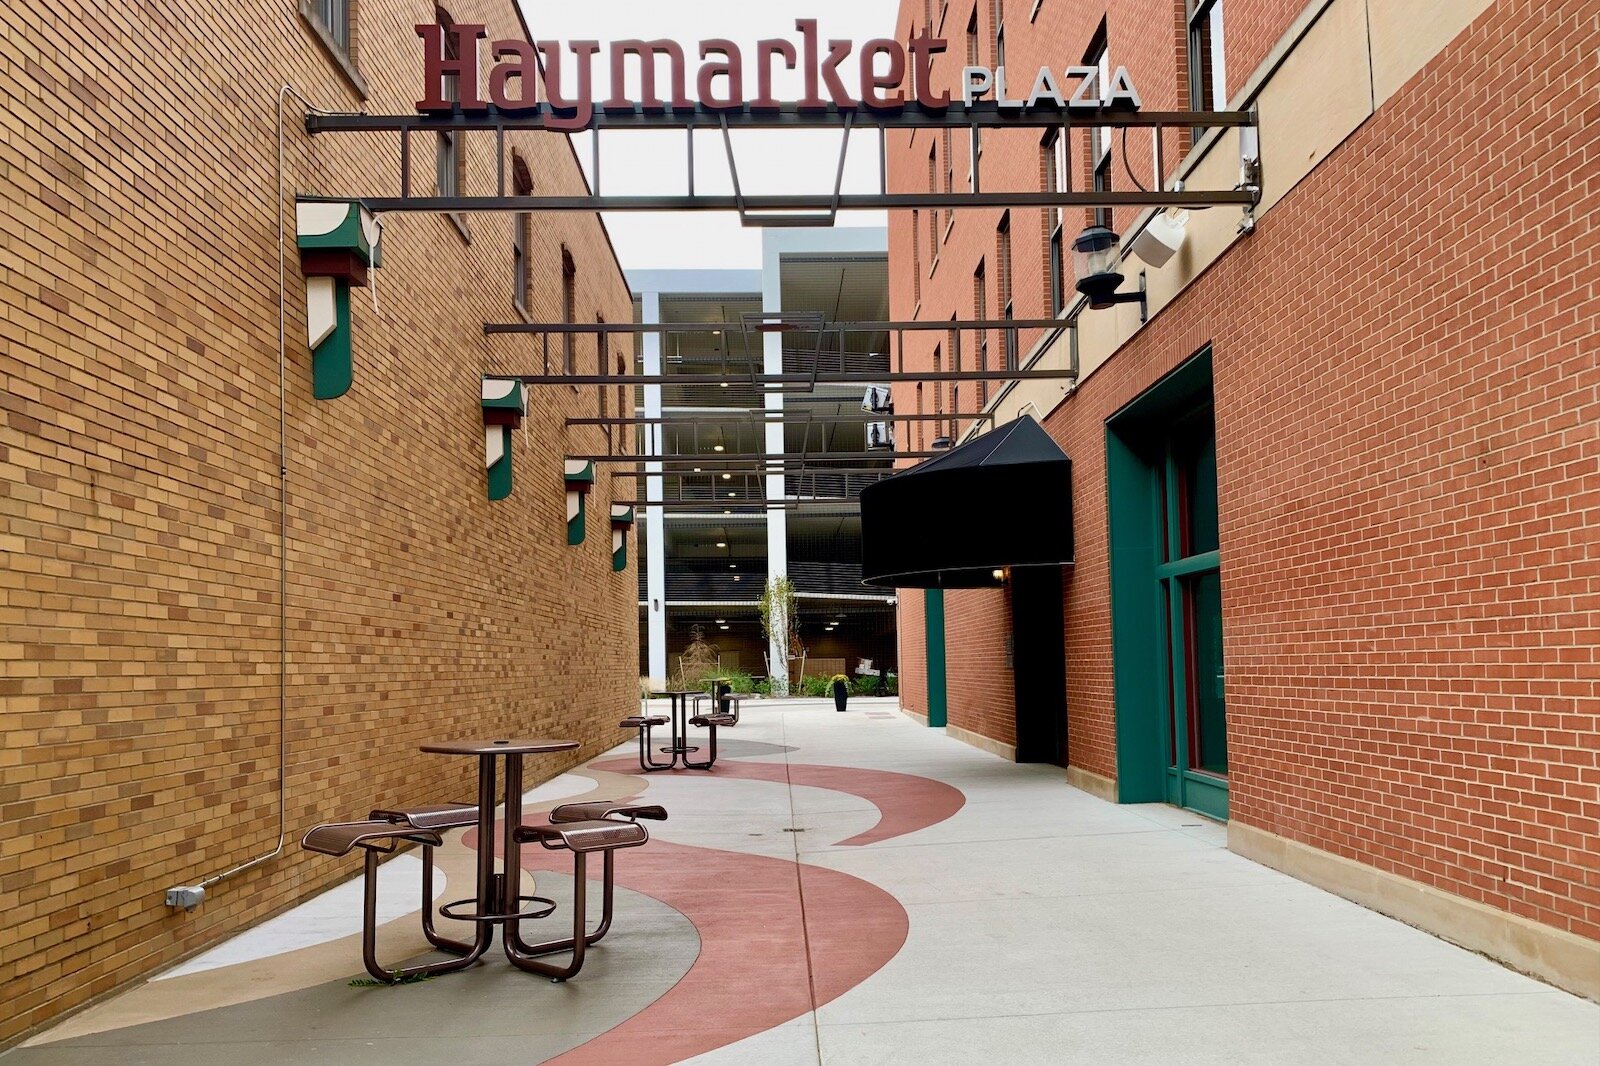 Haymarket Plaza includes about 7,000 square feet of space between the new Warner Building, at left, and the Main Street East Building, at right.